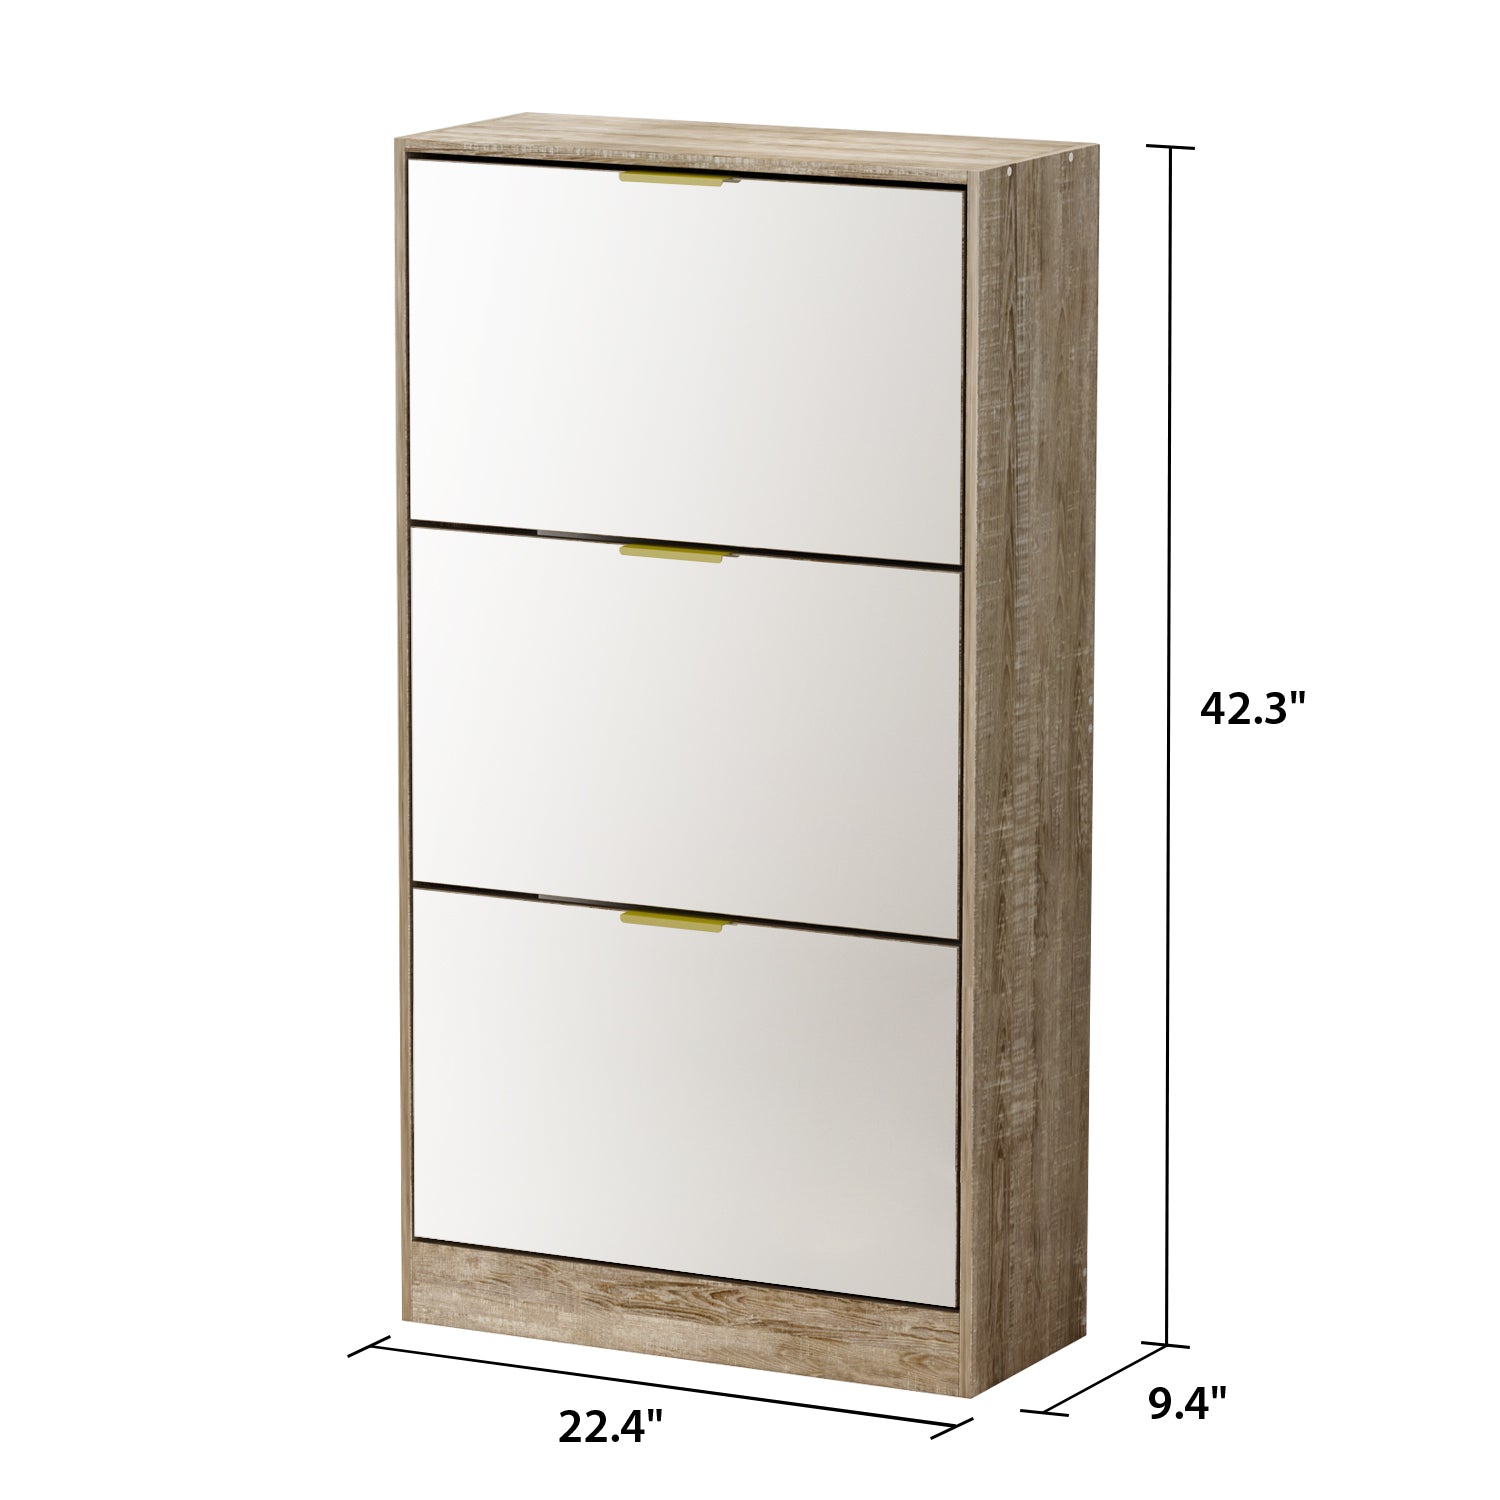 Entryway Shoe Storage Cabinet with 3 Flip Drawers Wood Shoe Cabinet Shoe Organizer with Mirrored Front